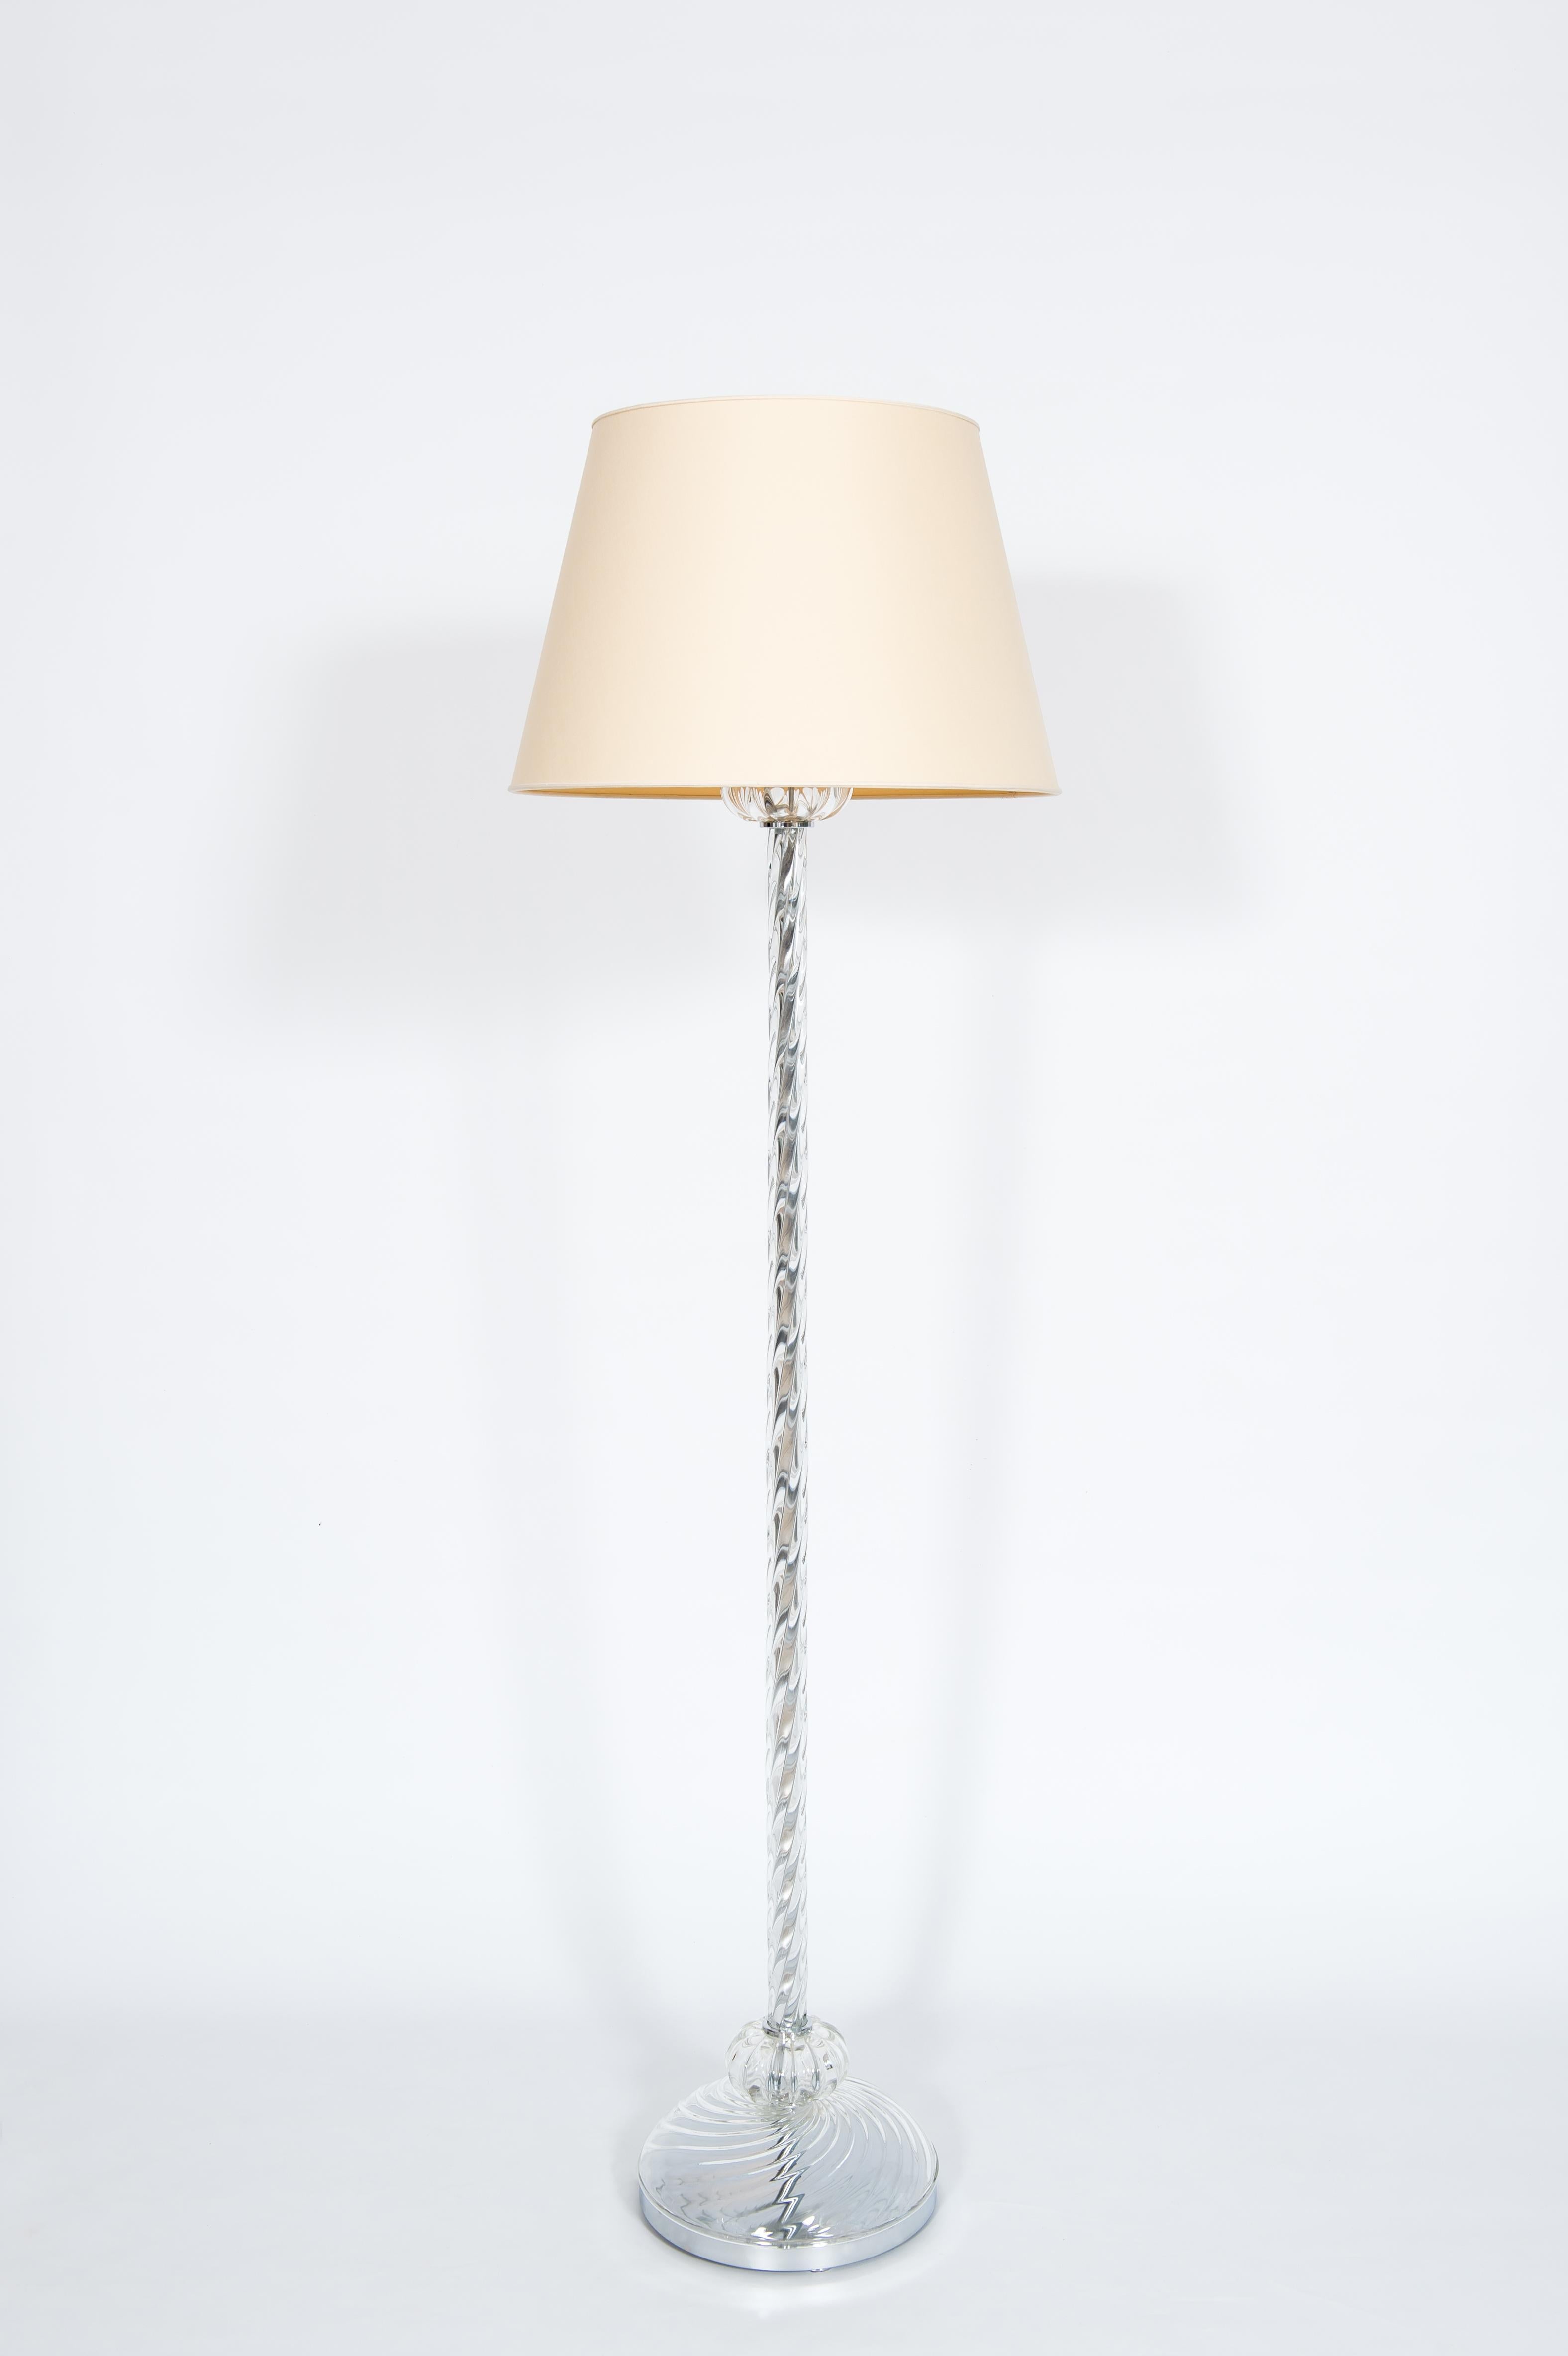 Transparent Torchon floor lamp in blown Murano glass, Contemporary, Venice.

This floor lamp is an outstanding masterpiece of the world-famous Murano glass art. 
The base is made of a chromed round base topped by a transparent glass cup. On top